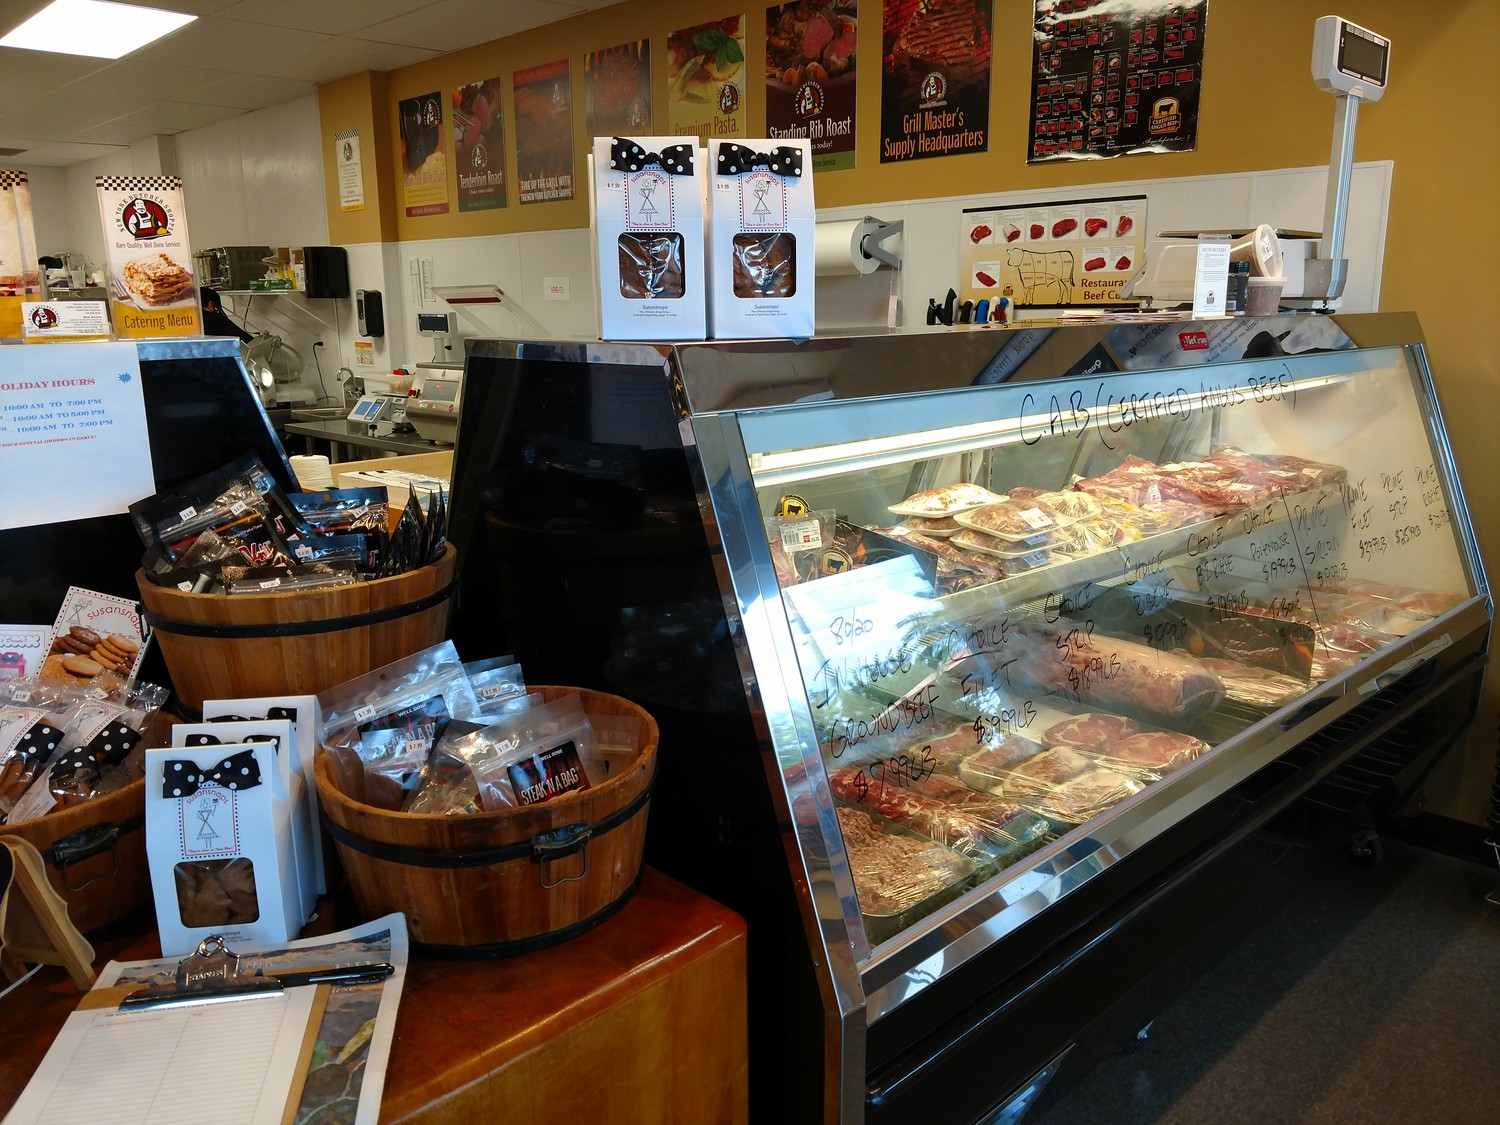 The New York Butcher Shoppe, which is now located at 240 A1A North, Unit 4 in Ponte Vedra Beach after relocating in 2017, offers lamb, pork, chicken, beef, sausages and more.